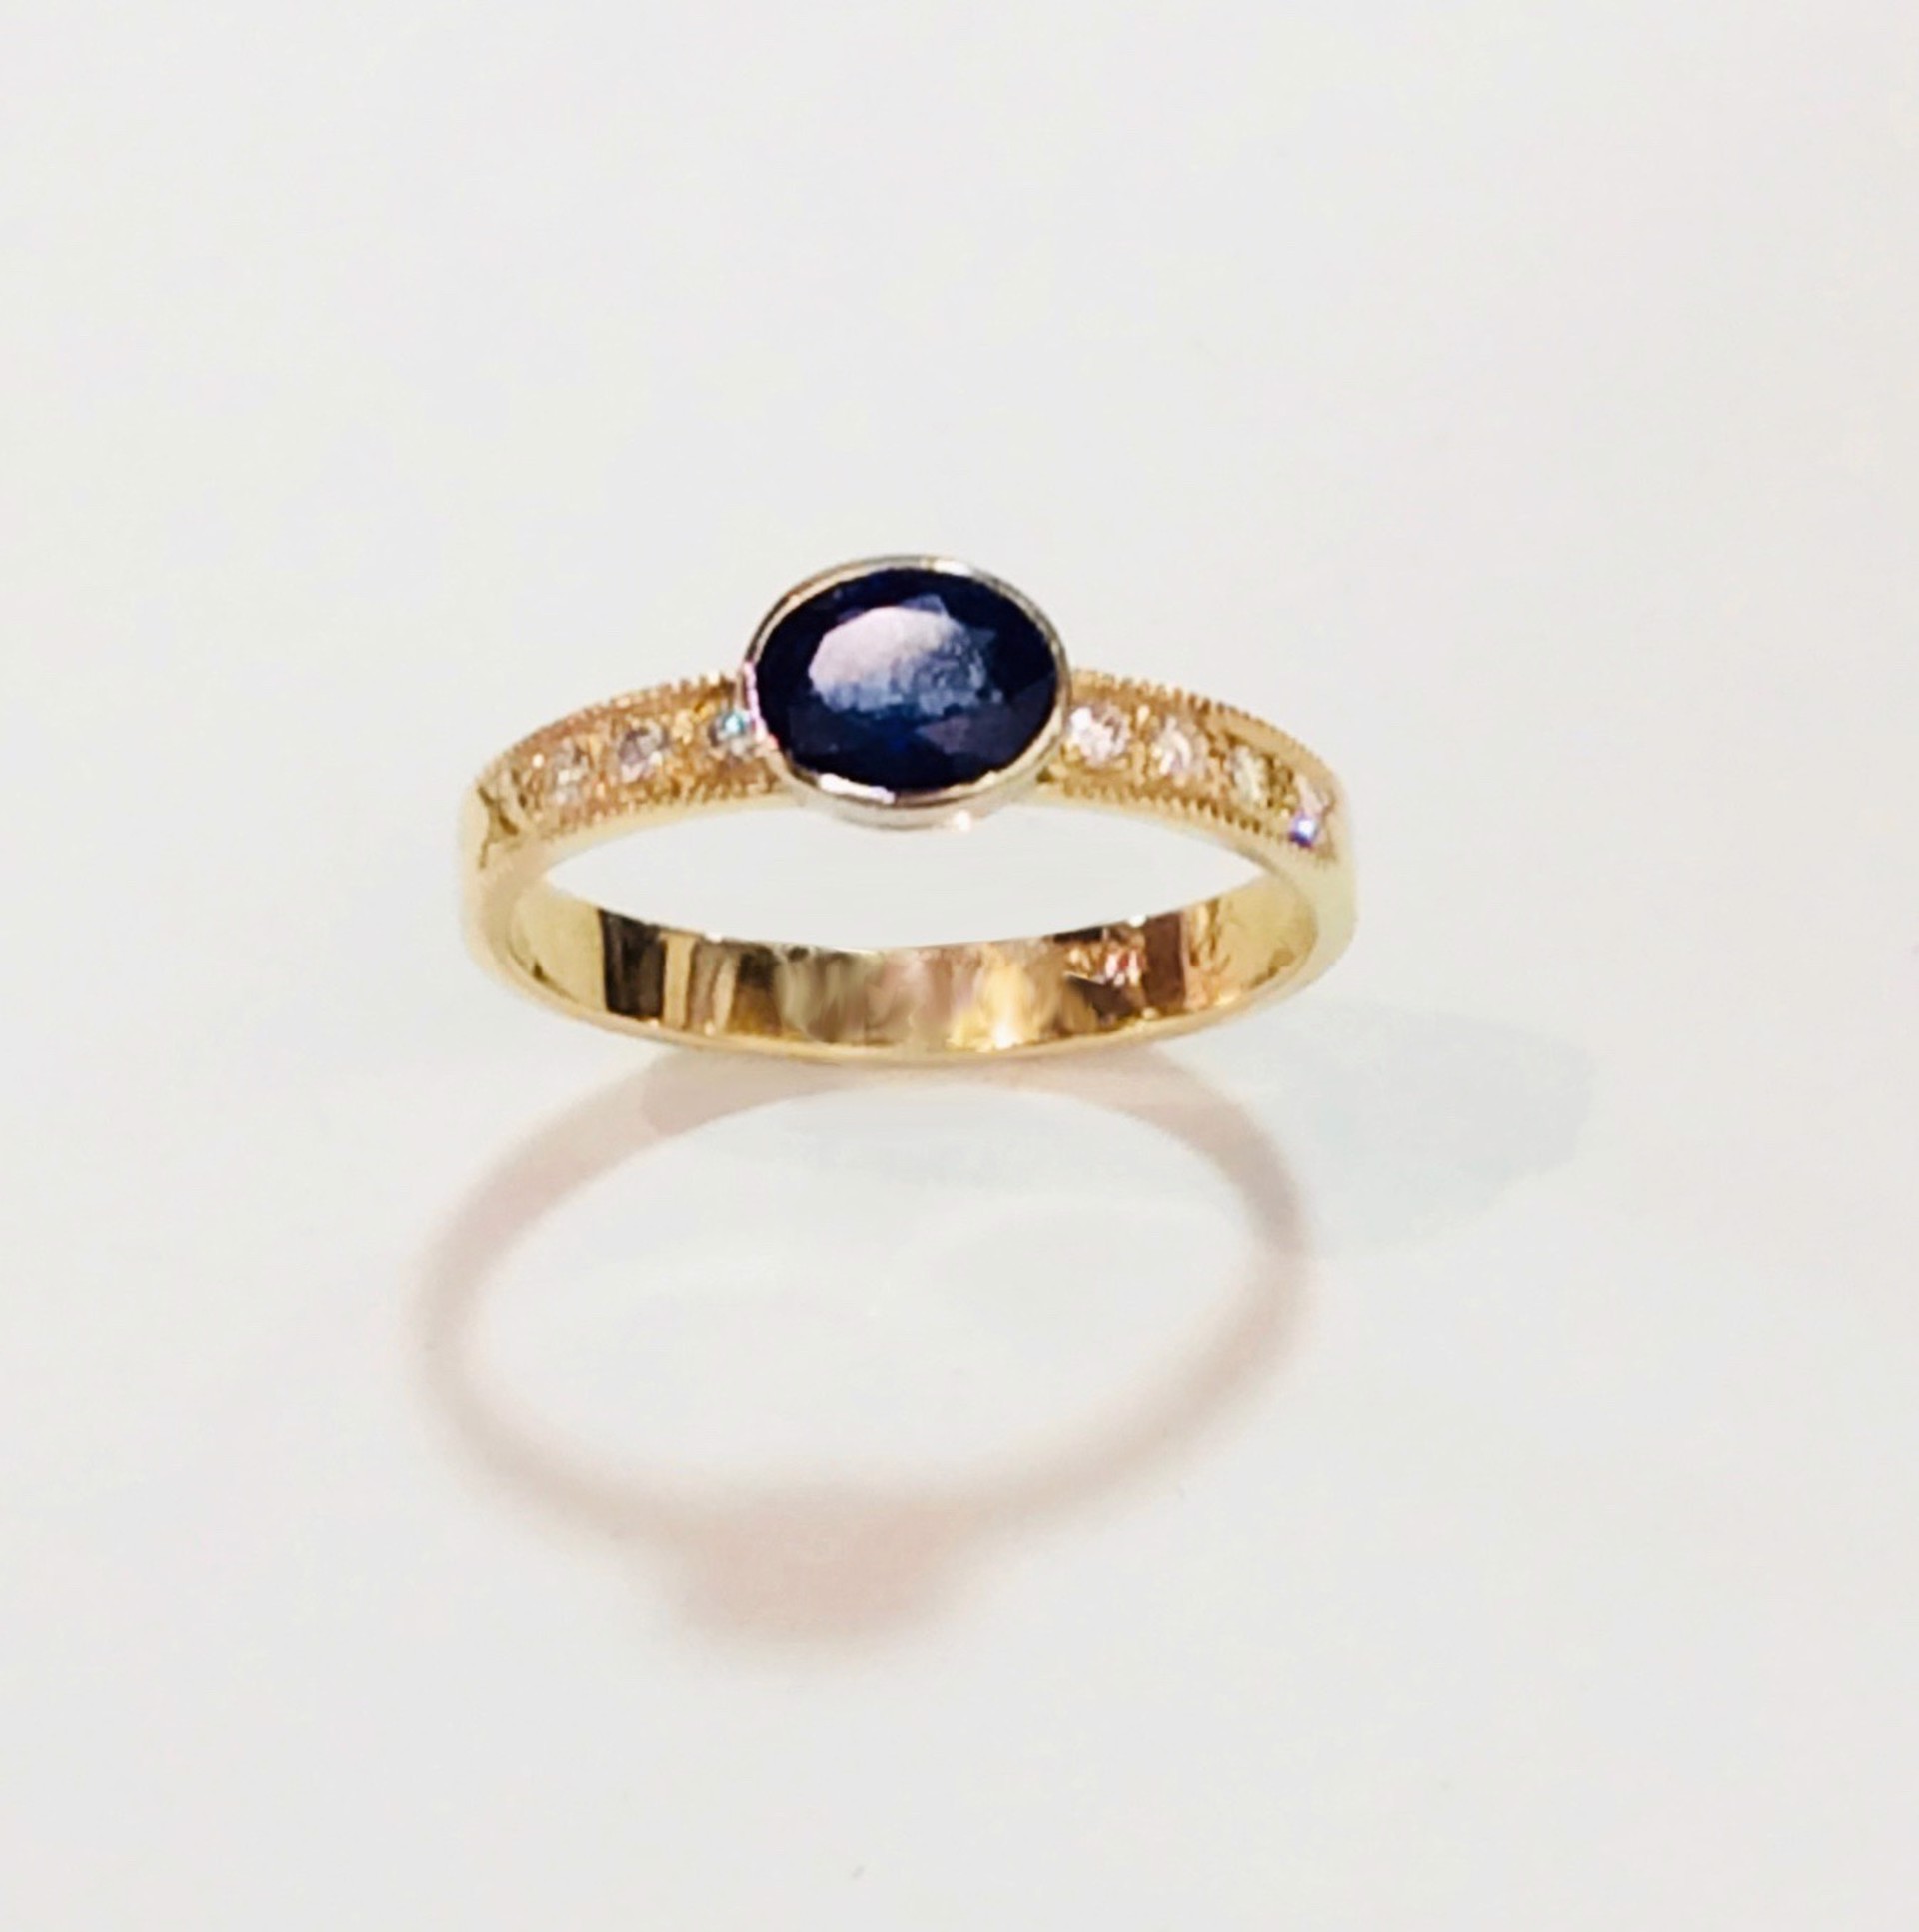 Gold and Sapphire Ring by D'ETTE DELFORGE